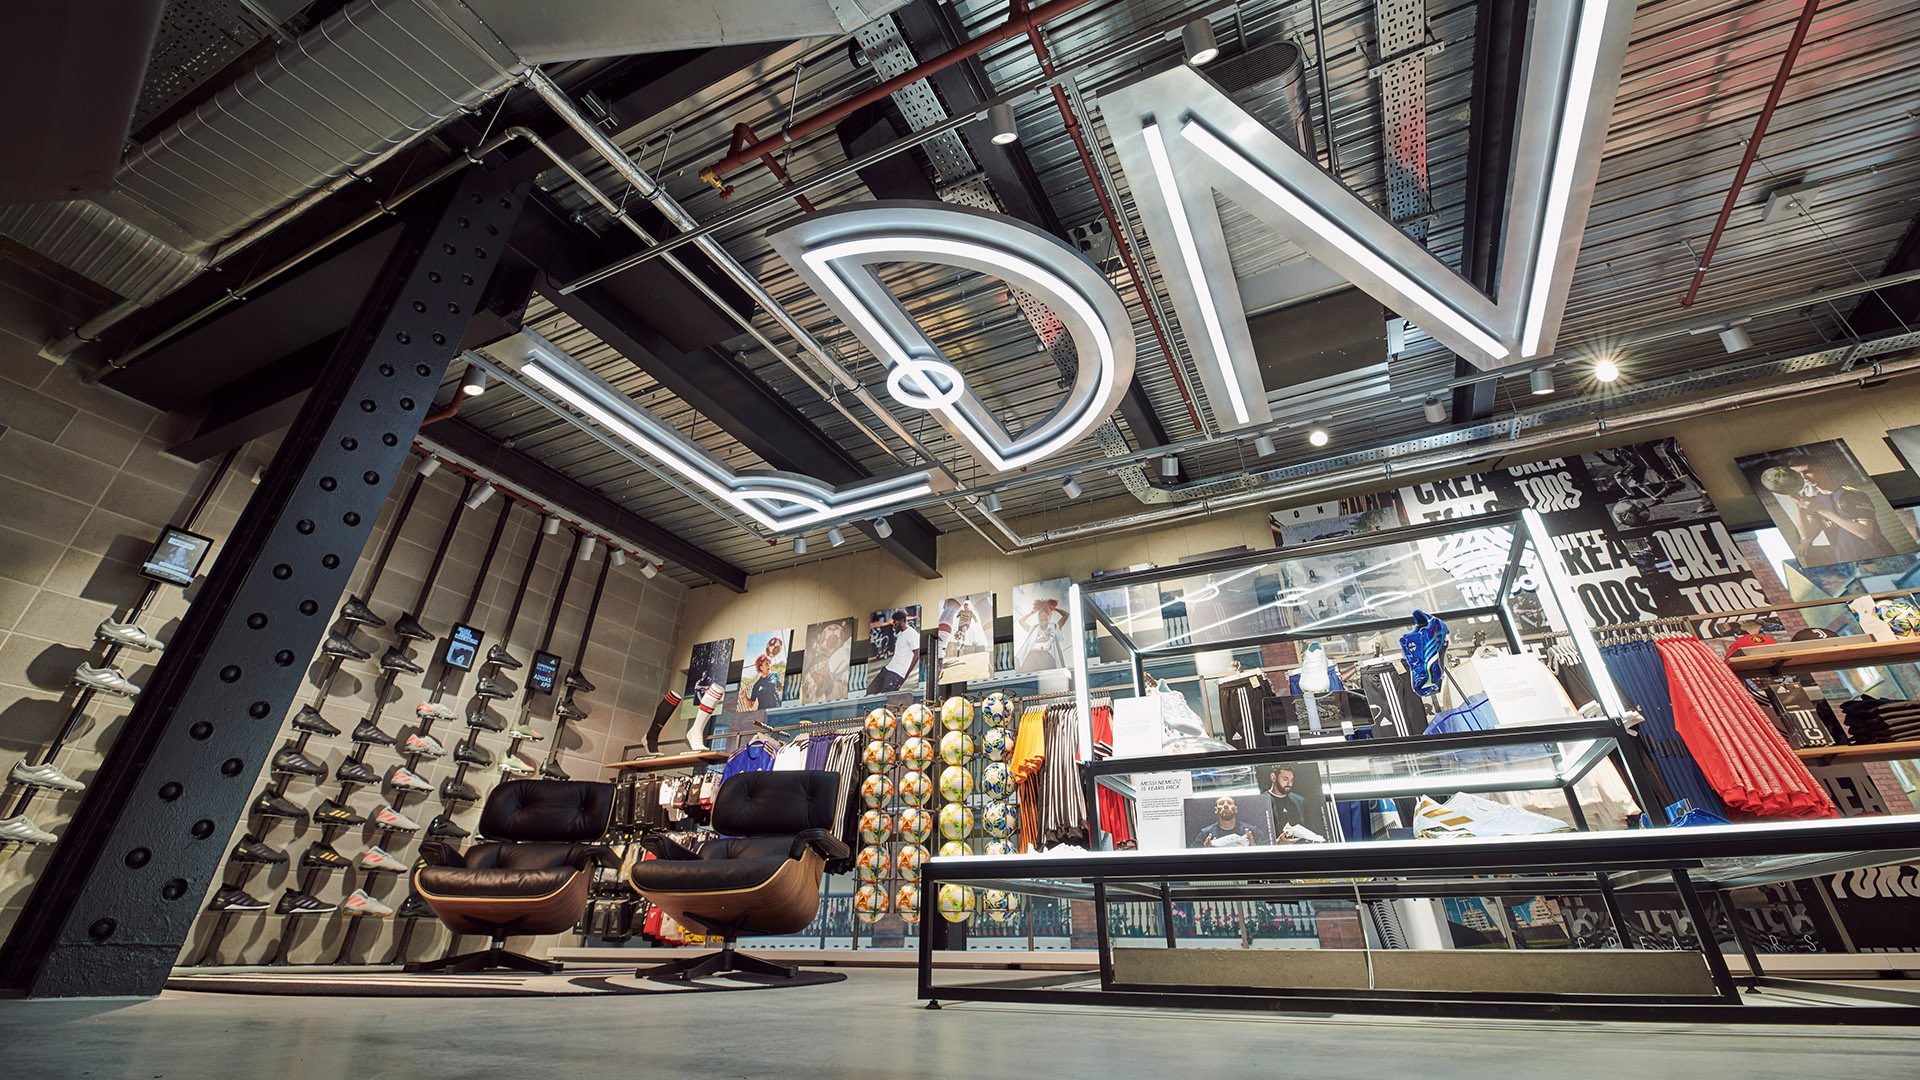 adidas LDN: The Most Digital adidas Store to Date - adidas Annual 2019